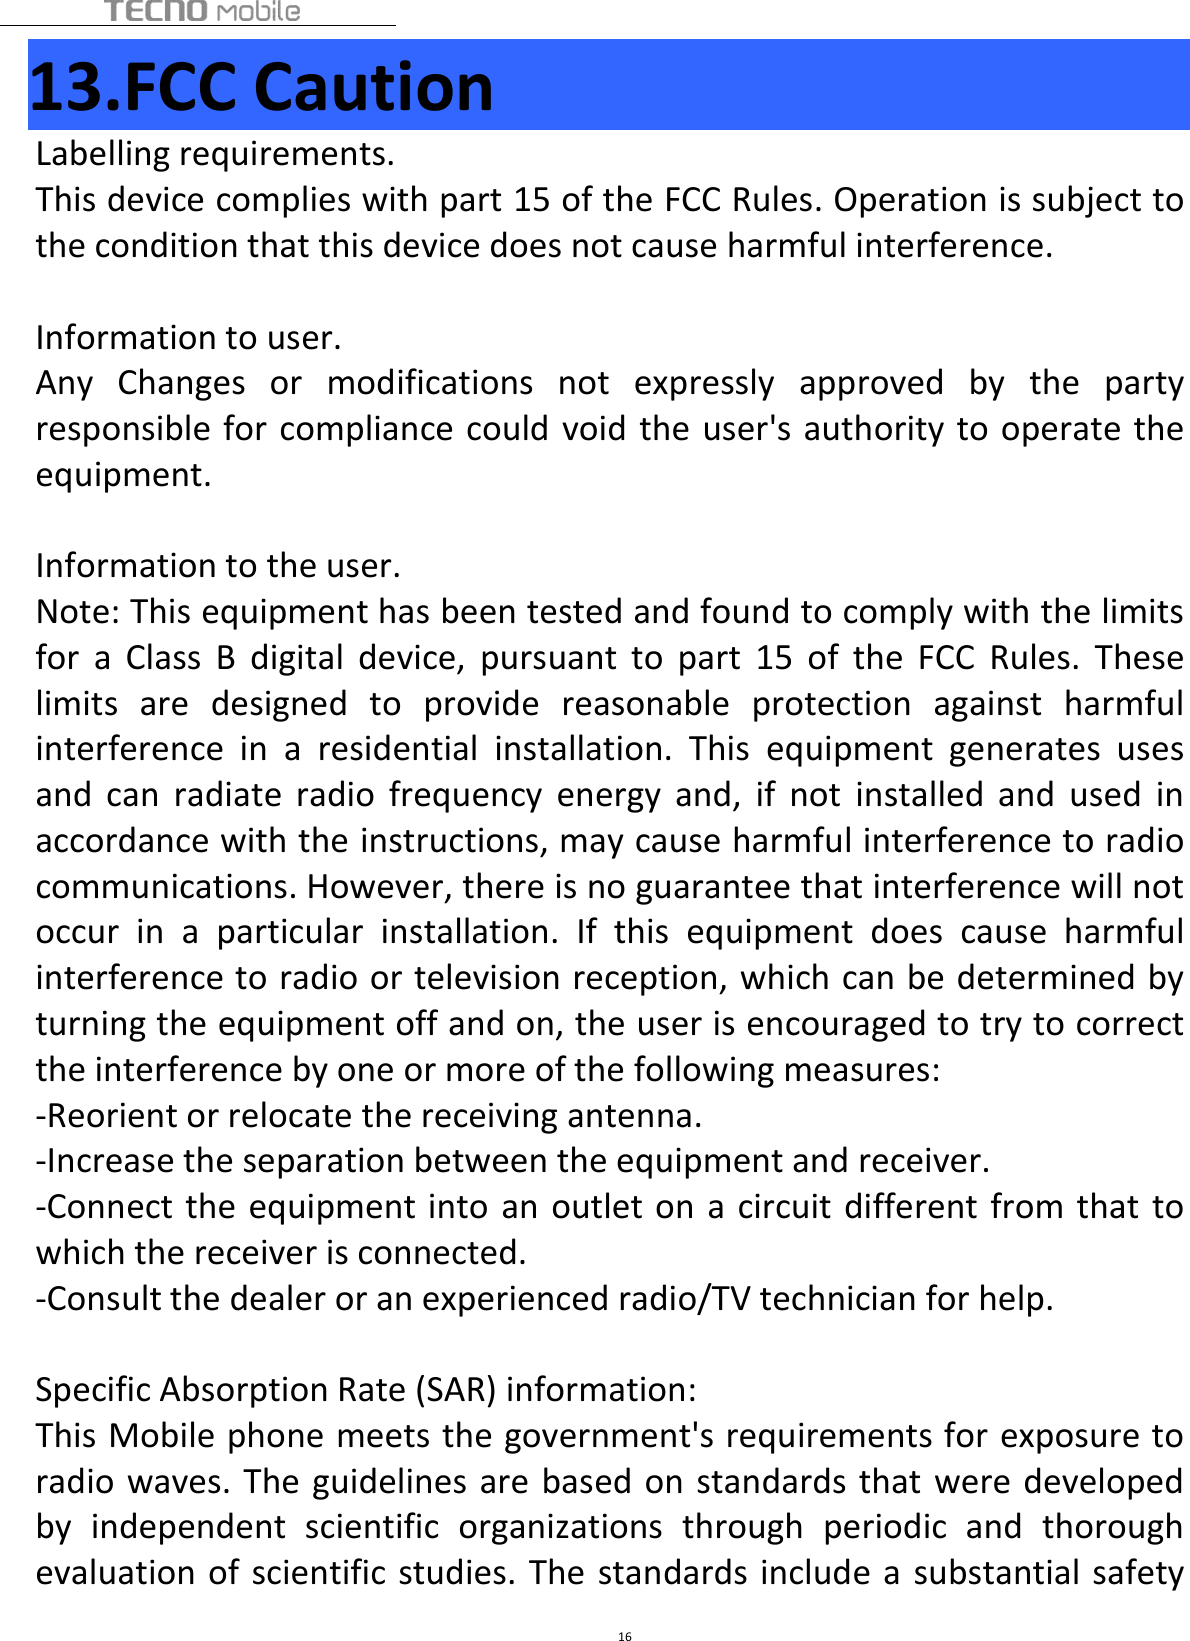 1613.FCC CautionLabelling requirements.This device complies with part 15 of the FCC Rules. Operation is subject tothe condition that this device does not cause harmful interference.Information to user.Any Changes or modifications not expressly approved by the partyresponsible for compliance could void the user&apos;s authority to operate theequipment.Information to the user.Note: This equipment has been tested and found to comply with the limitsfor a Class B digital device, pursuant to part 15 of the FCC Rules. Theselimits are designed to provide reasonable protection against harmfulinterference in a residential installation. This equipment generates usesand can radiate radio frequency energy and, if not installed and used inaccordance with the instructions, may cause harmful interference to radiocommunications. However, there is no guarantee that interference will notoccur in a particular installation. If this equipment does cause harmfulinterference to radio or television reception, which can be determined byturning the equipment off and on, the user is encouraged to try to correctthe interference by one or more of the following measures:-Reorient or relocate the receiving antenna.-Increase the separation between the equipment and receiver.-Connect the equipment into an outlet on a circuit different from that towhich the receiver is connected.-Consult the dealer or an experienced radio/TV technician for help.Specific Absorption Rate (SAR) information:This Mobile phone meets the government&apos;s requirements for exposure toradio waves. The guidelines are based on standards that were developedby independent scientific organizations through periodic and thoroughevaluation of scientific studies. The standards include a substantial safety